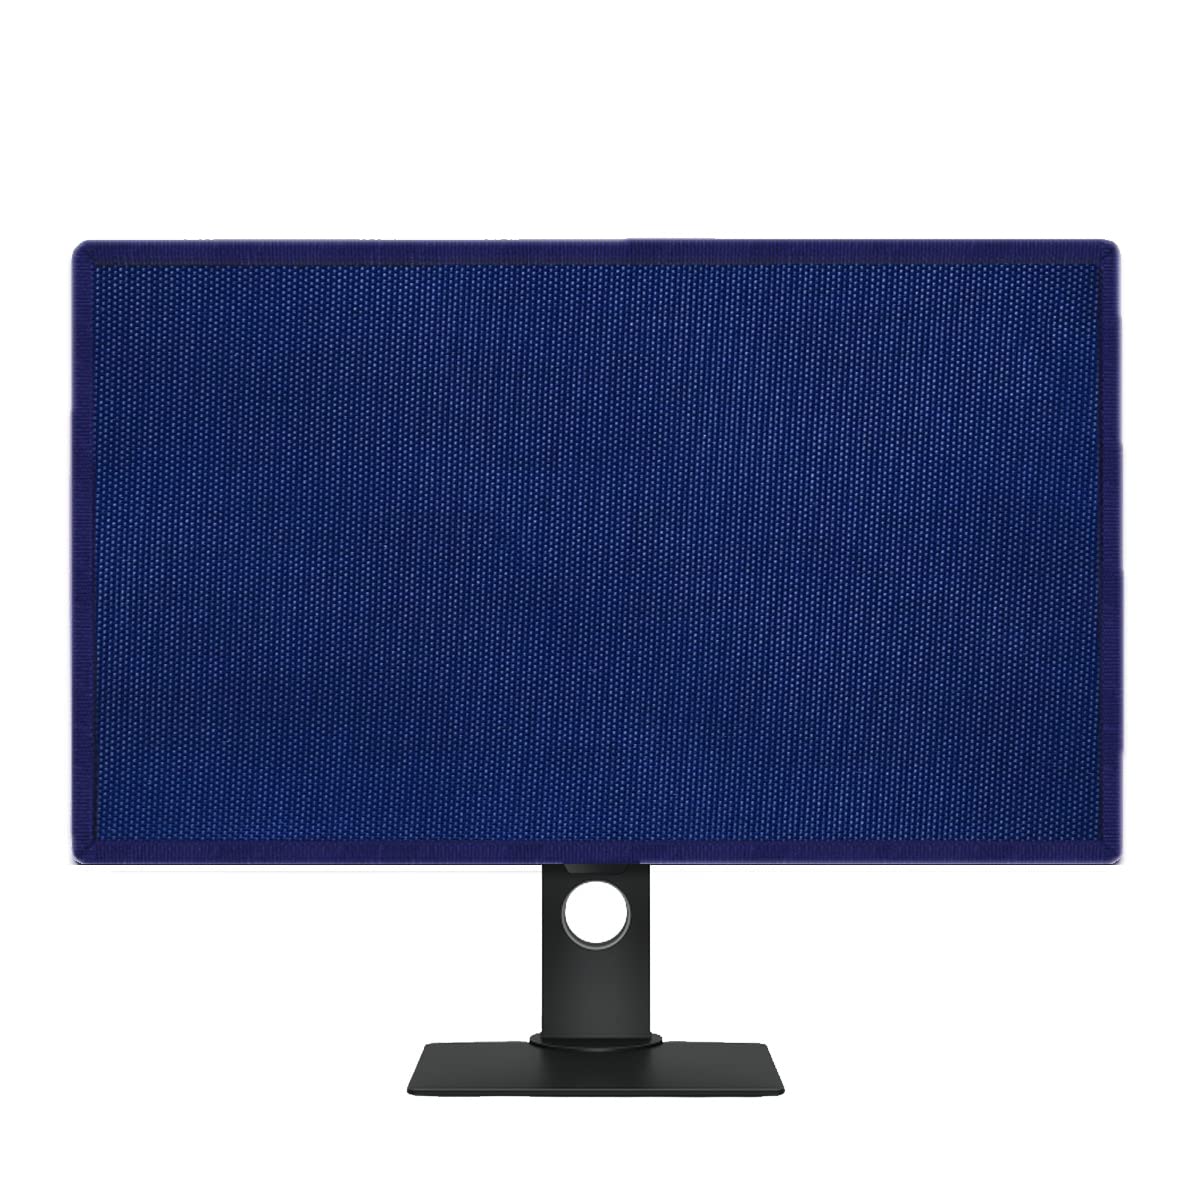 PalaP Dust Proof Monitor Cover for ASUS 24 inches Monitor